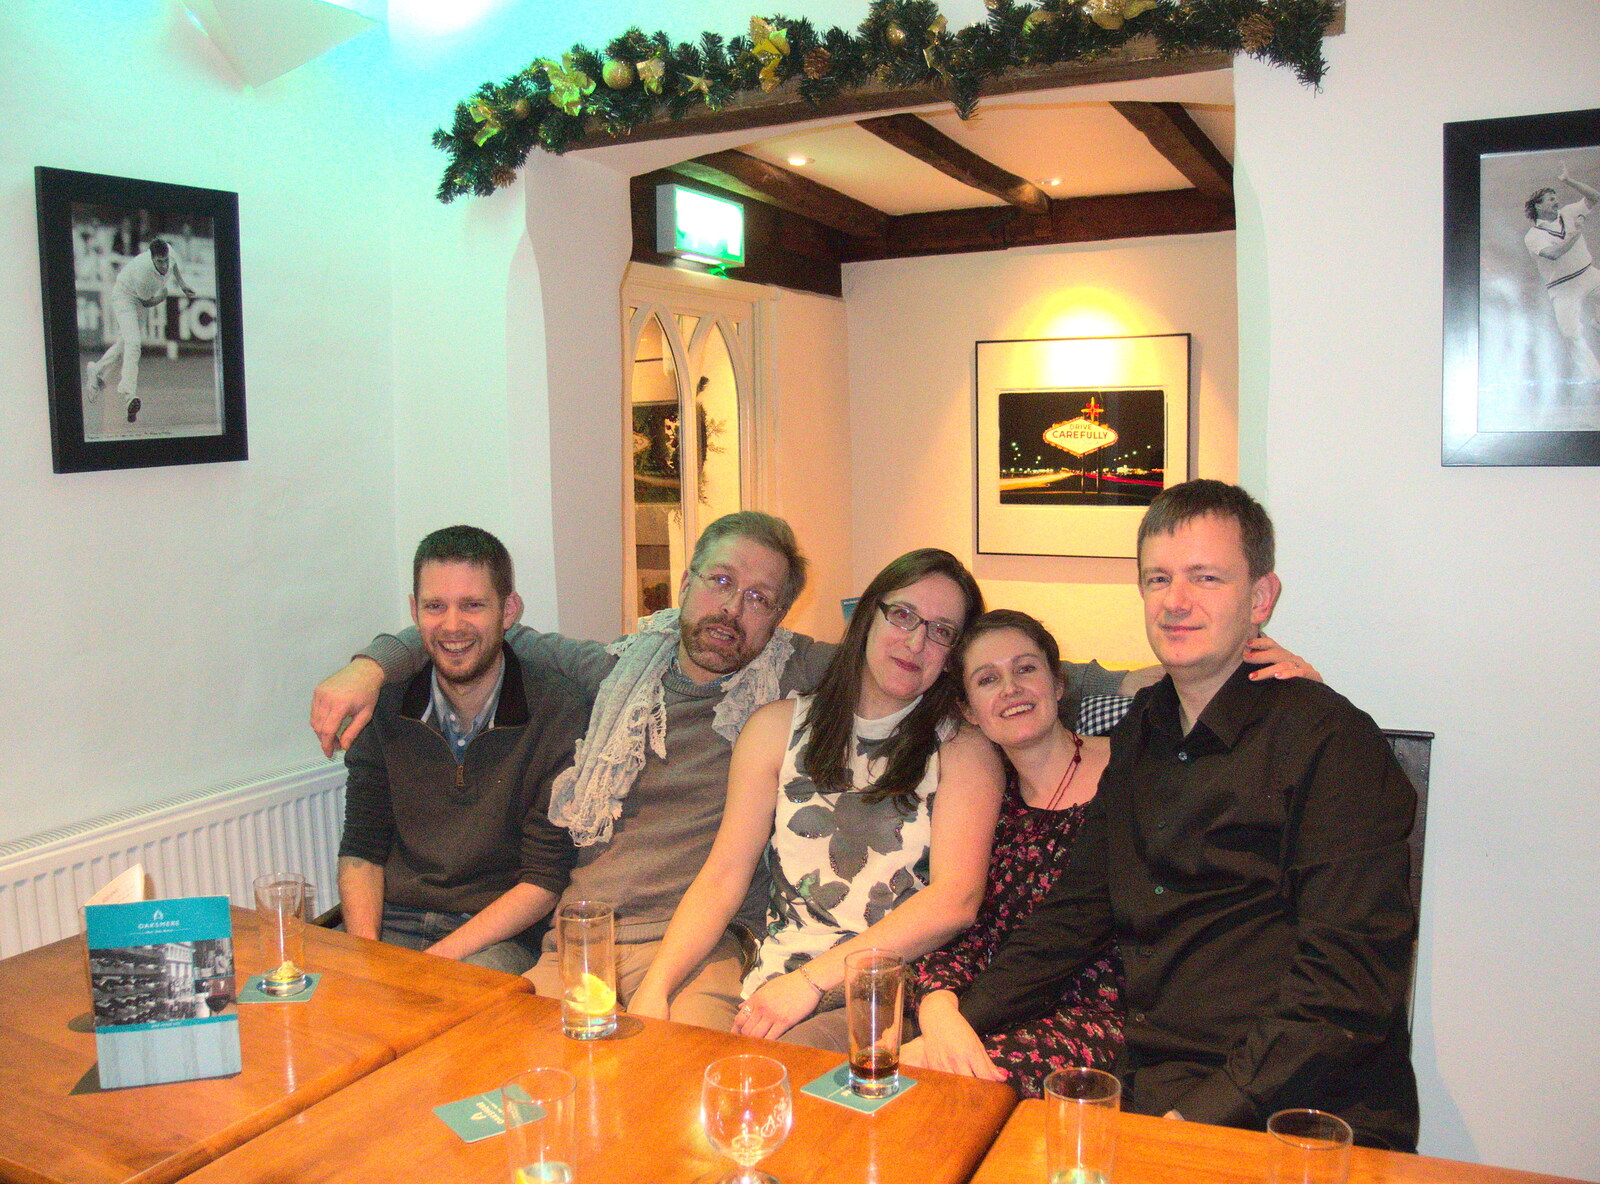 A group photo from New Year's Eve at the Oaksmere, Brome, Suffolk - 31st December 2014